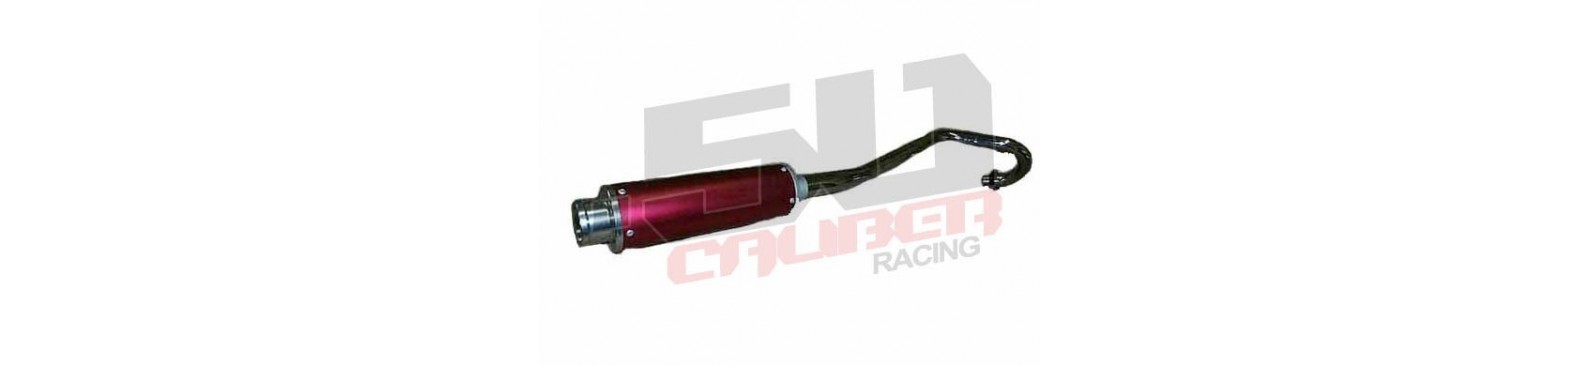 50 Caliber performance pipe with 1 inc header tube for xr50 crf50 xr-50 crf honda